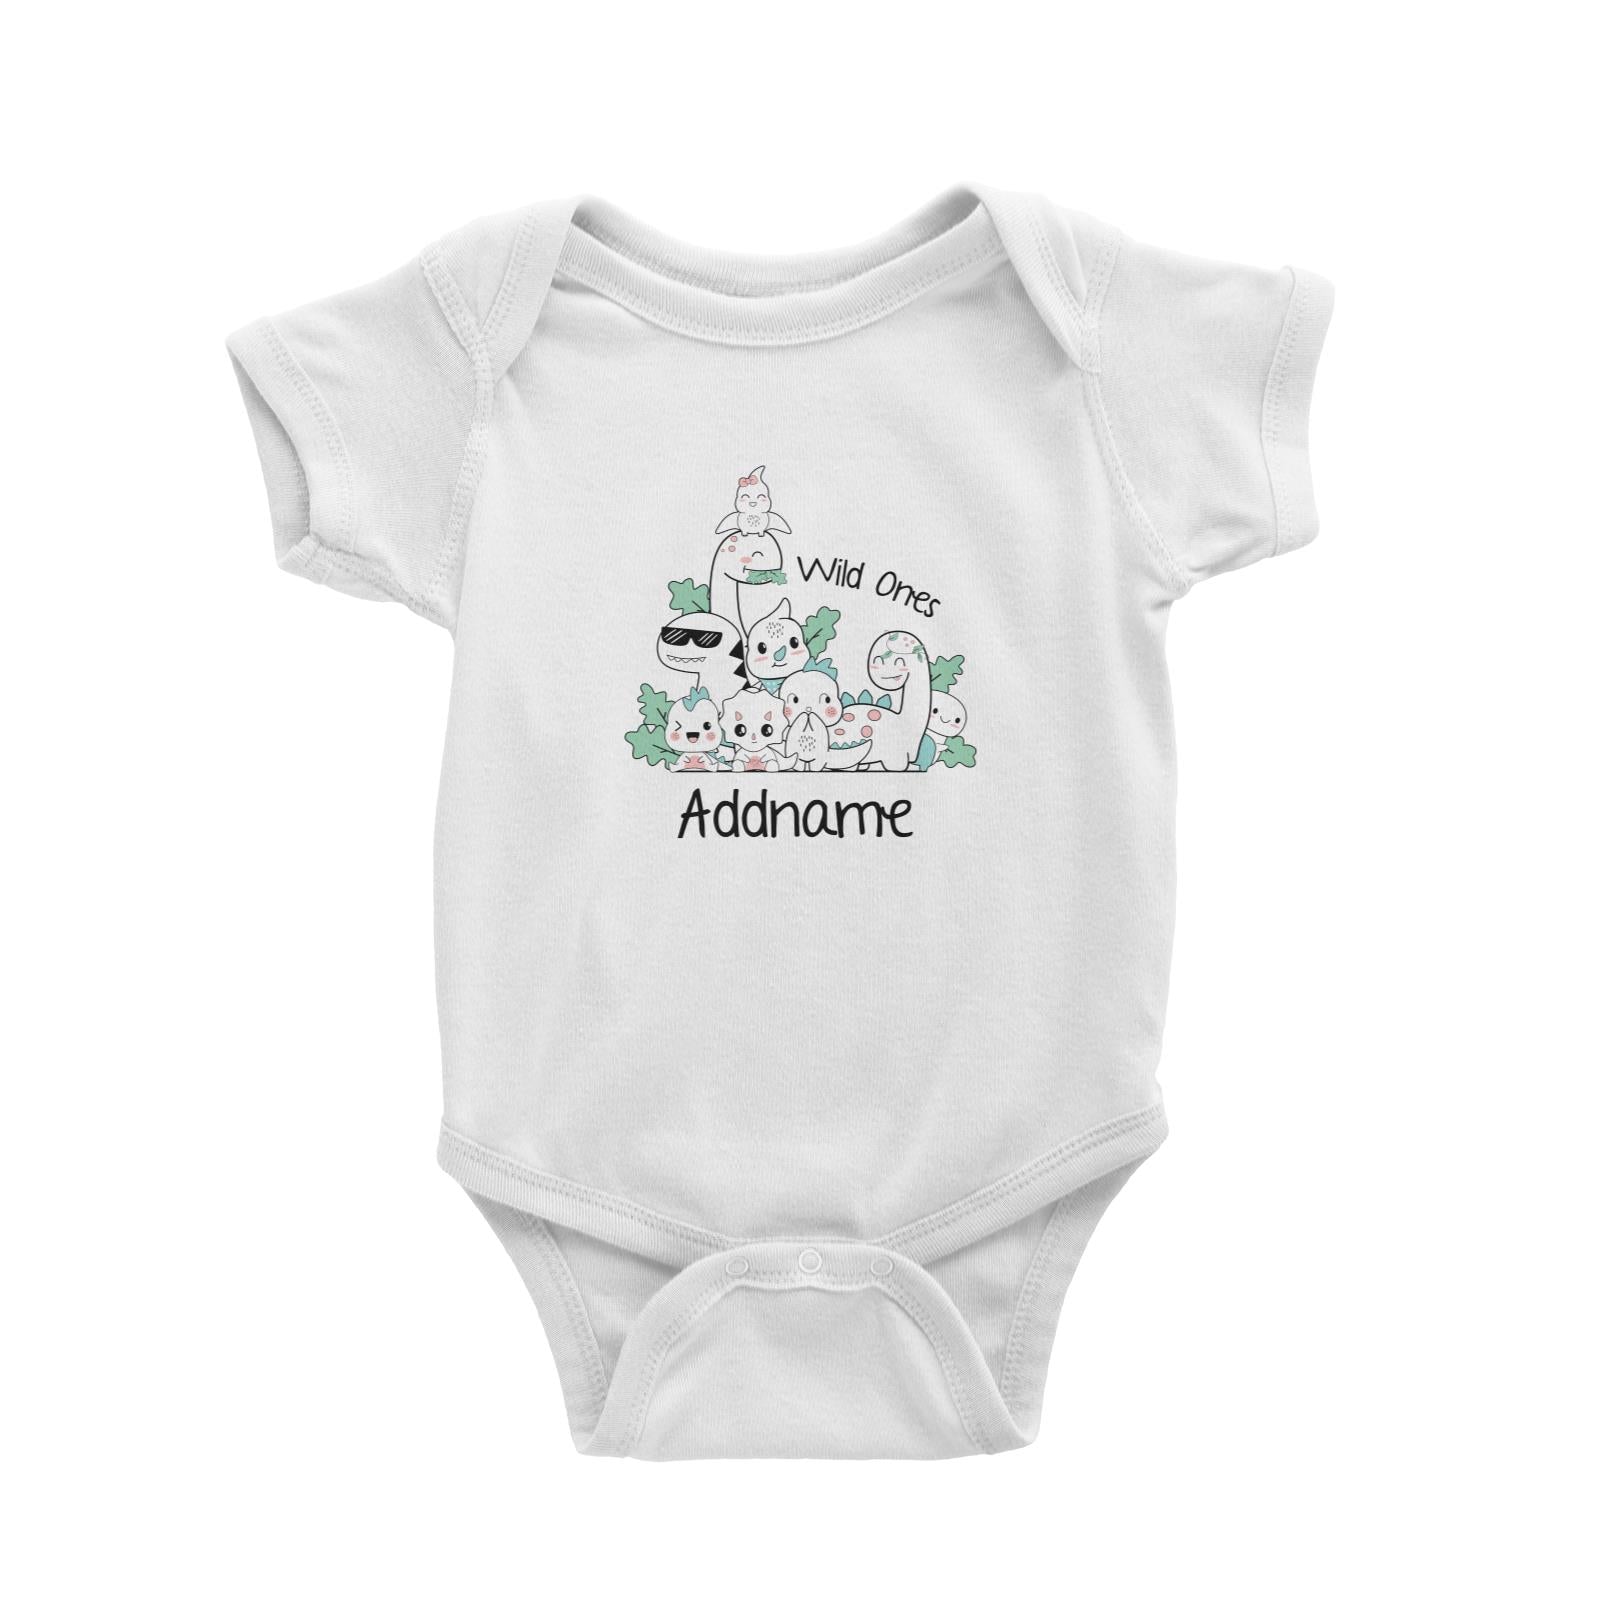 Cute Animals And Friends Series Cute Little Dinosaur Wild Ones Addname Baby Romper